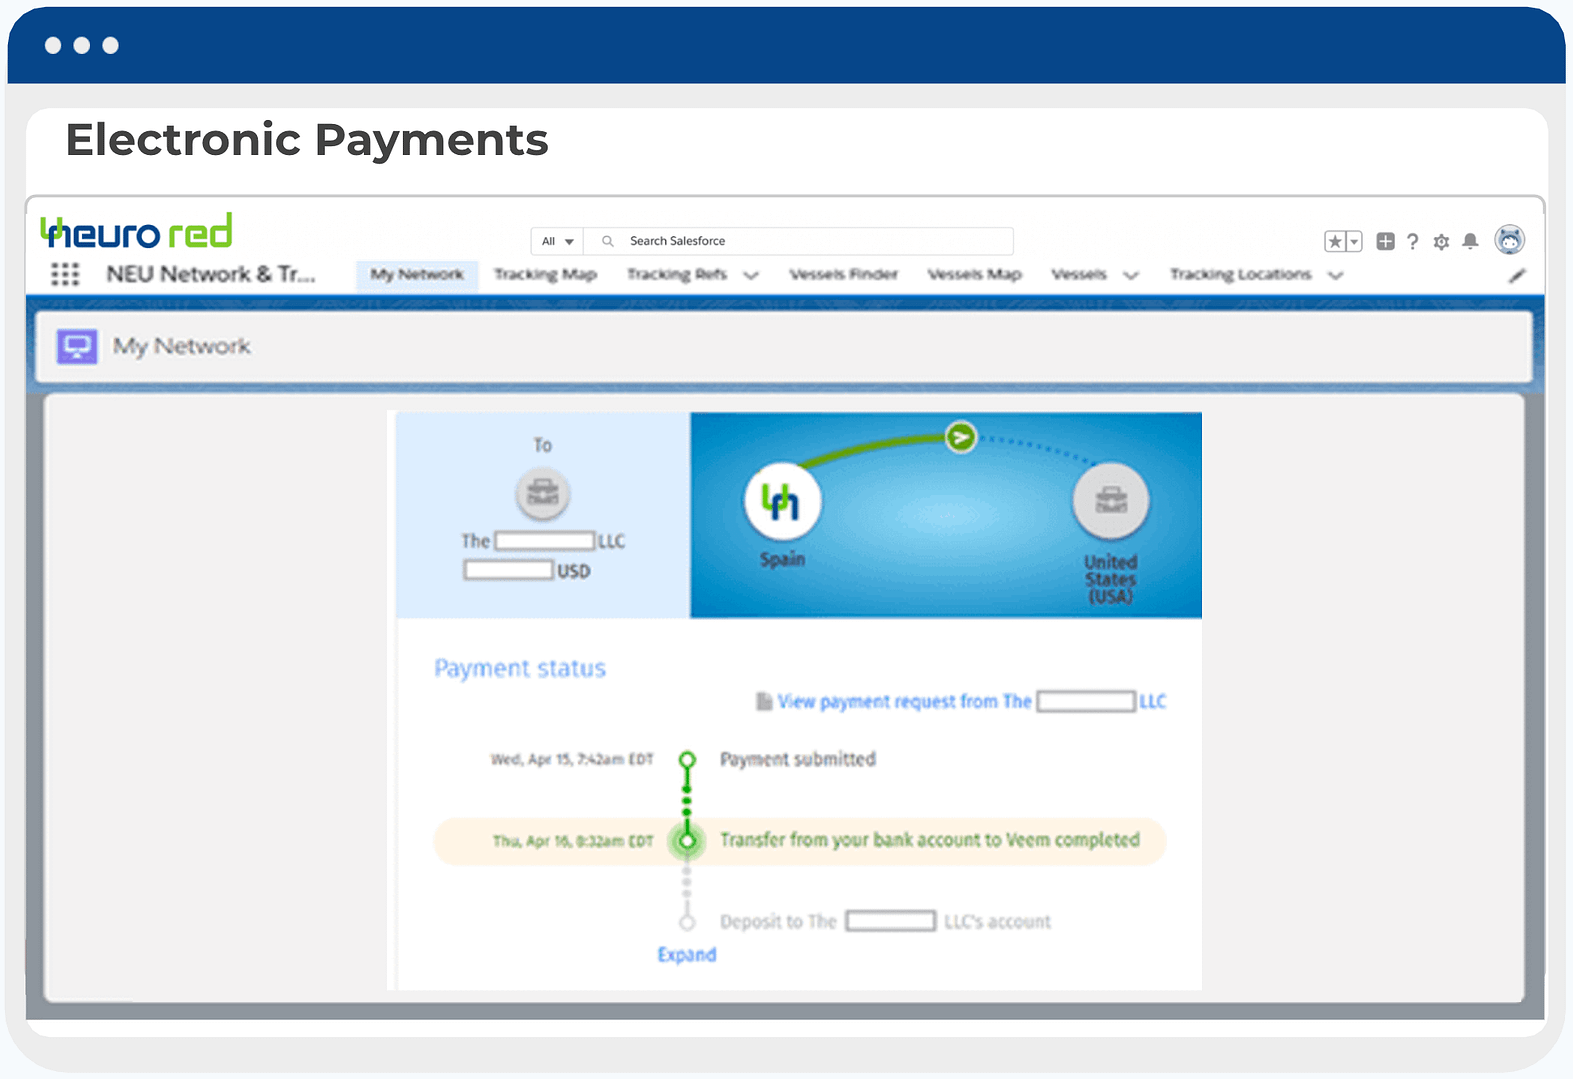 Electronic Payments